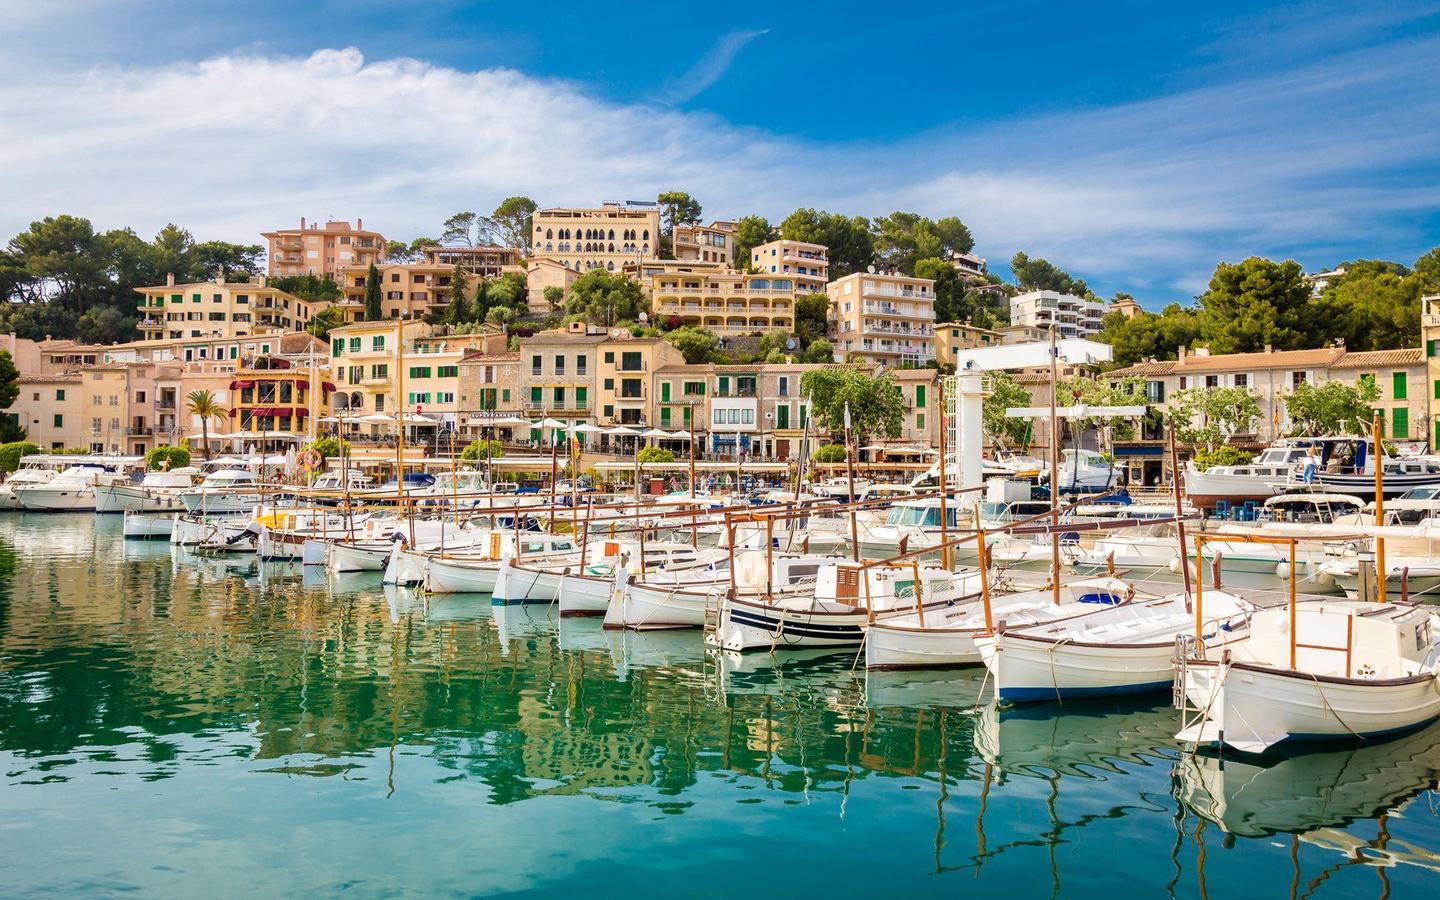 Scenic view of Port de Sóller marina in Mallorca, with boats docked in the clear turquoise water and colorful hillside buildings under a bright blue sky